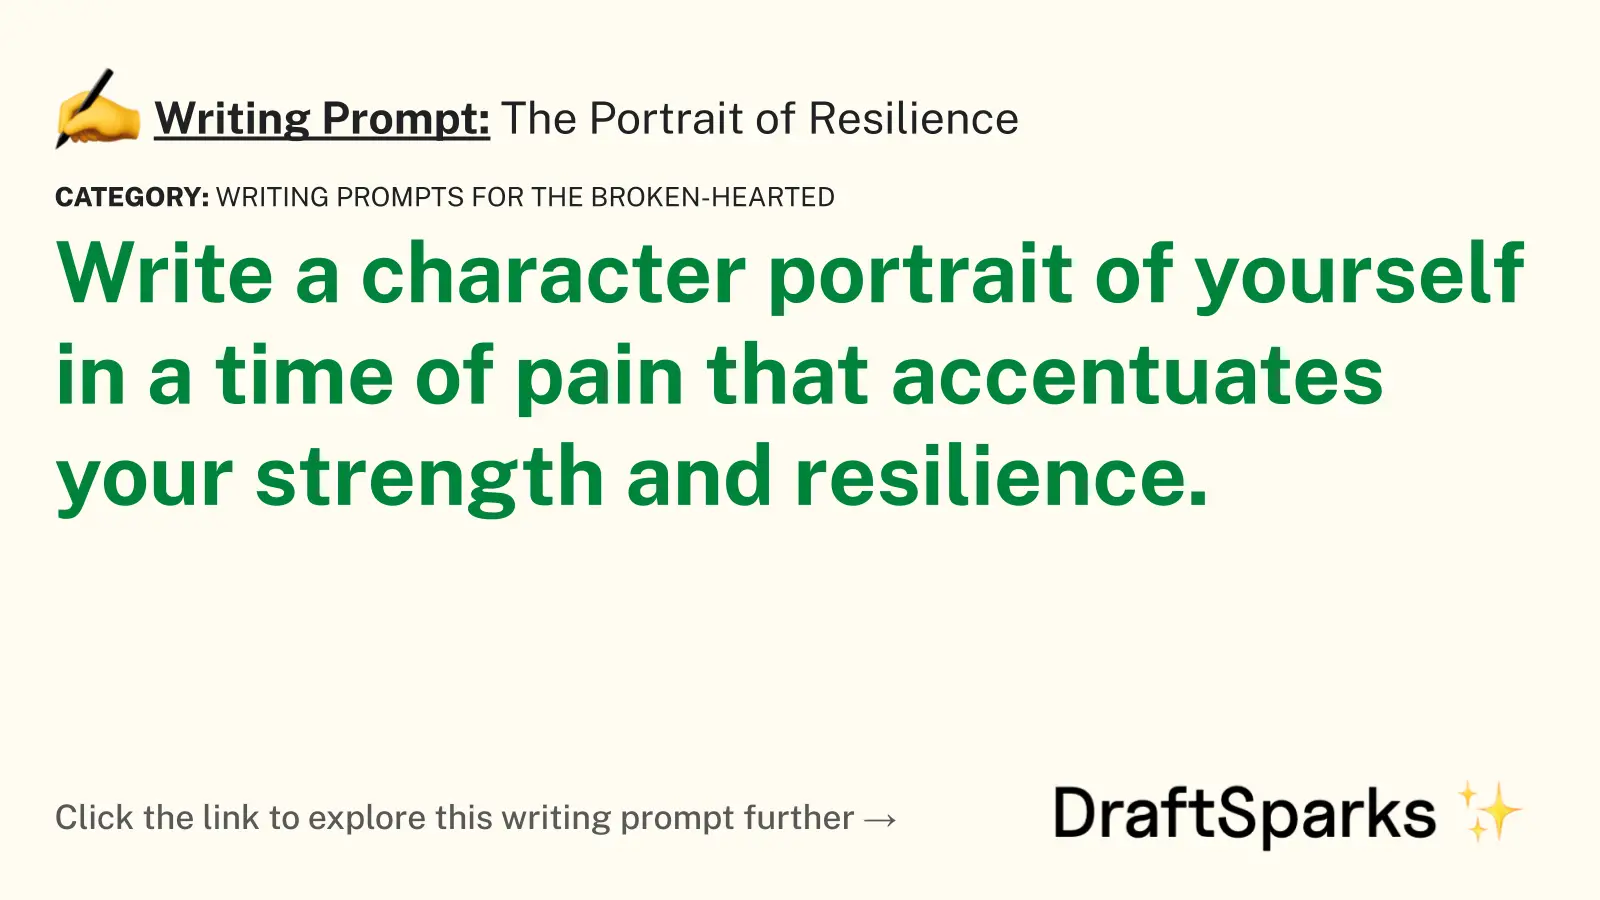 The Portrait of Resilience